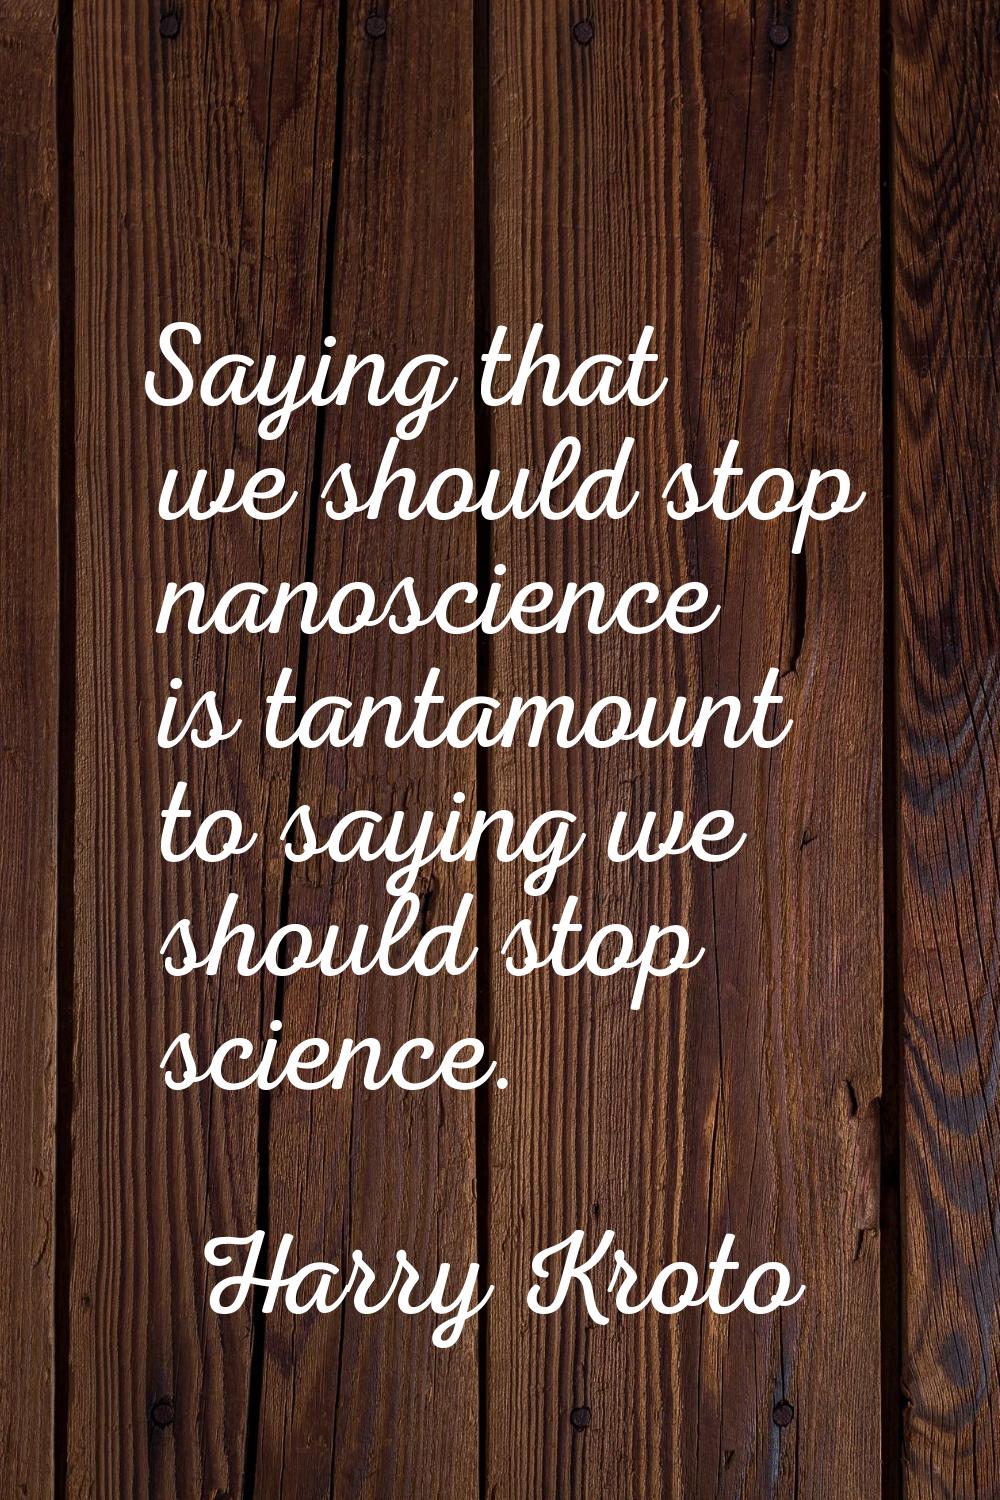 Saying that we should stop nanoscience is tantamount to saying we should stop science.